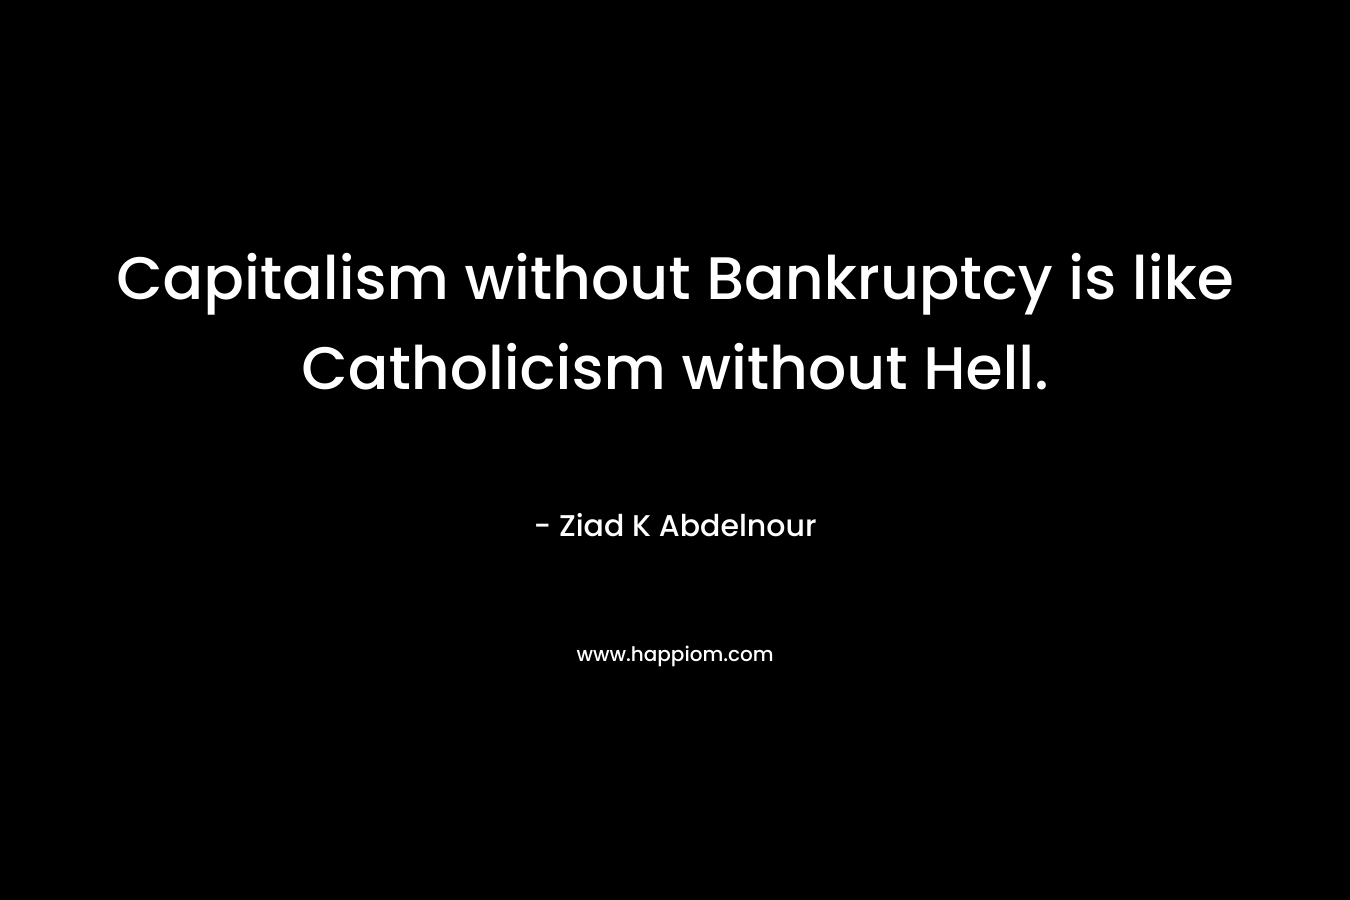 Capitalism without Bankruptcy is like Catholicism without Hell. – Ziad K Abdelnour